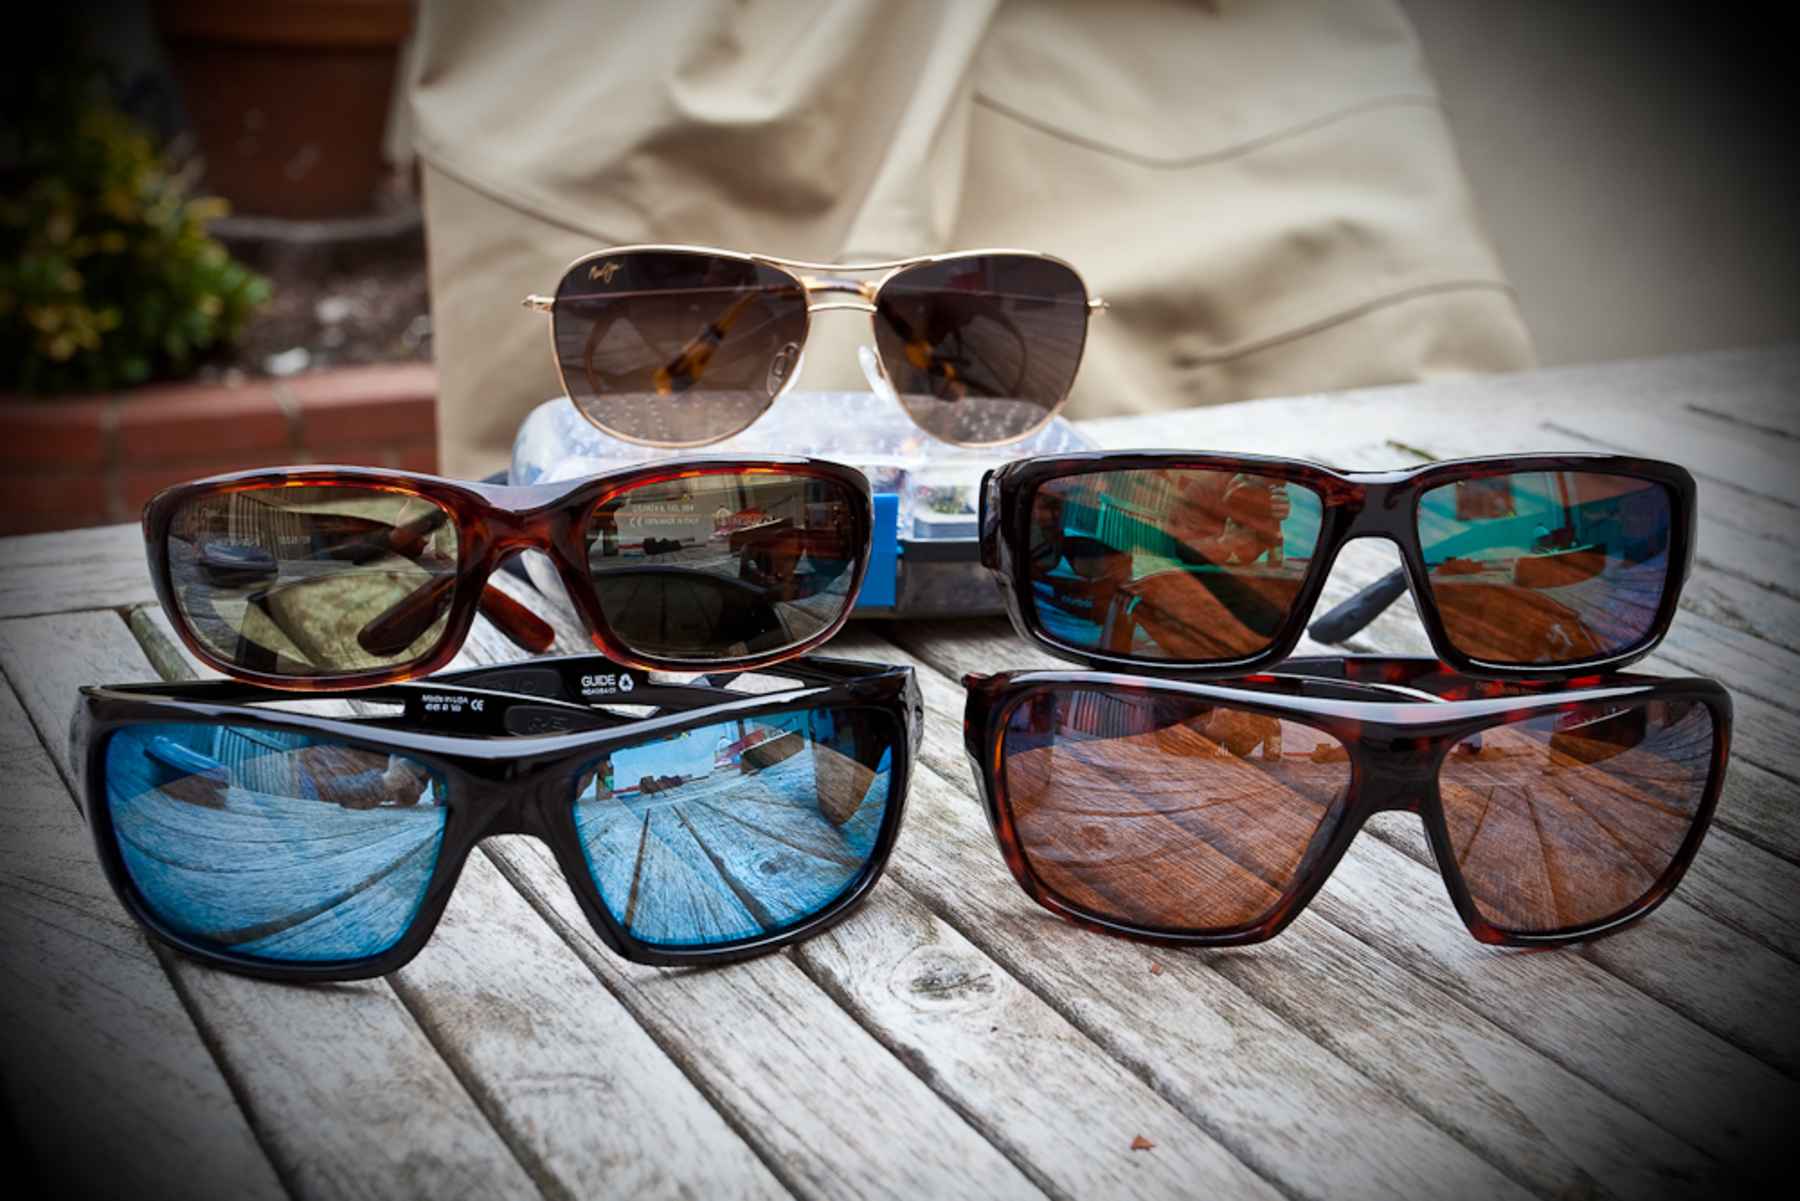 http://www.hatchmag.com/sites/default/files/styles/extra-large/public/field/image/best-fishing-sunglasses-1.jpg